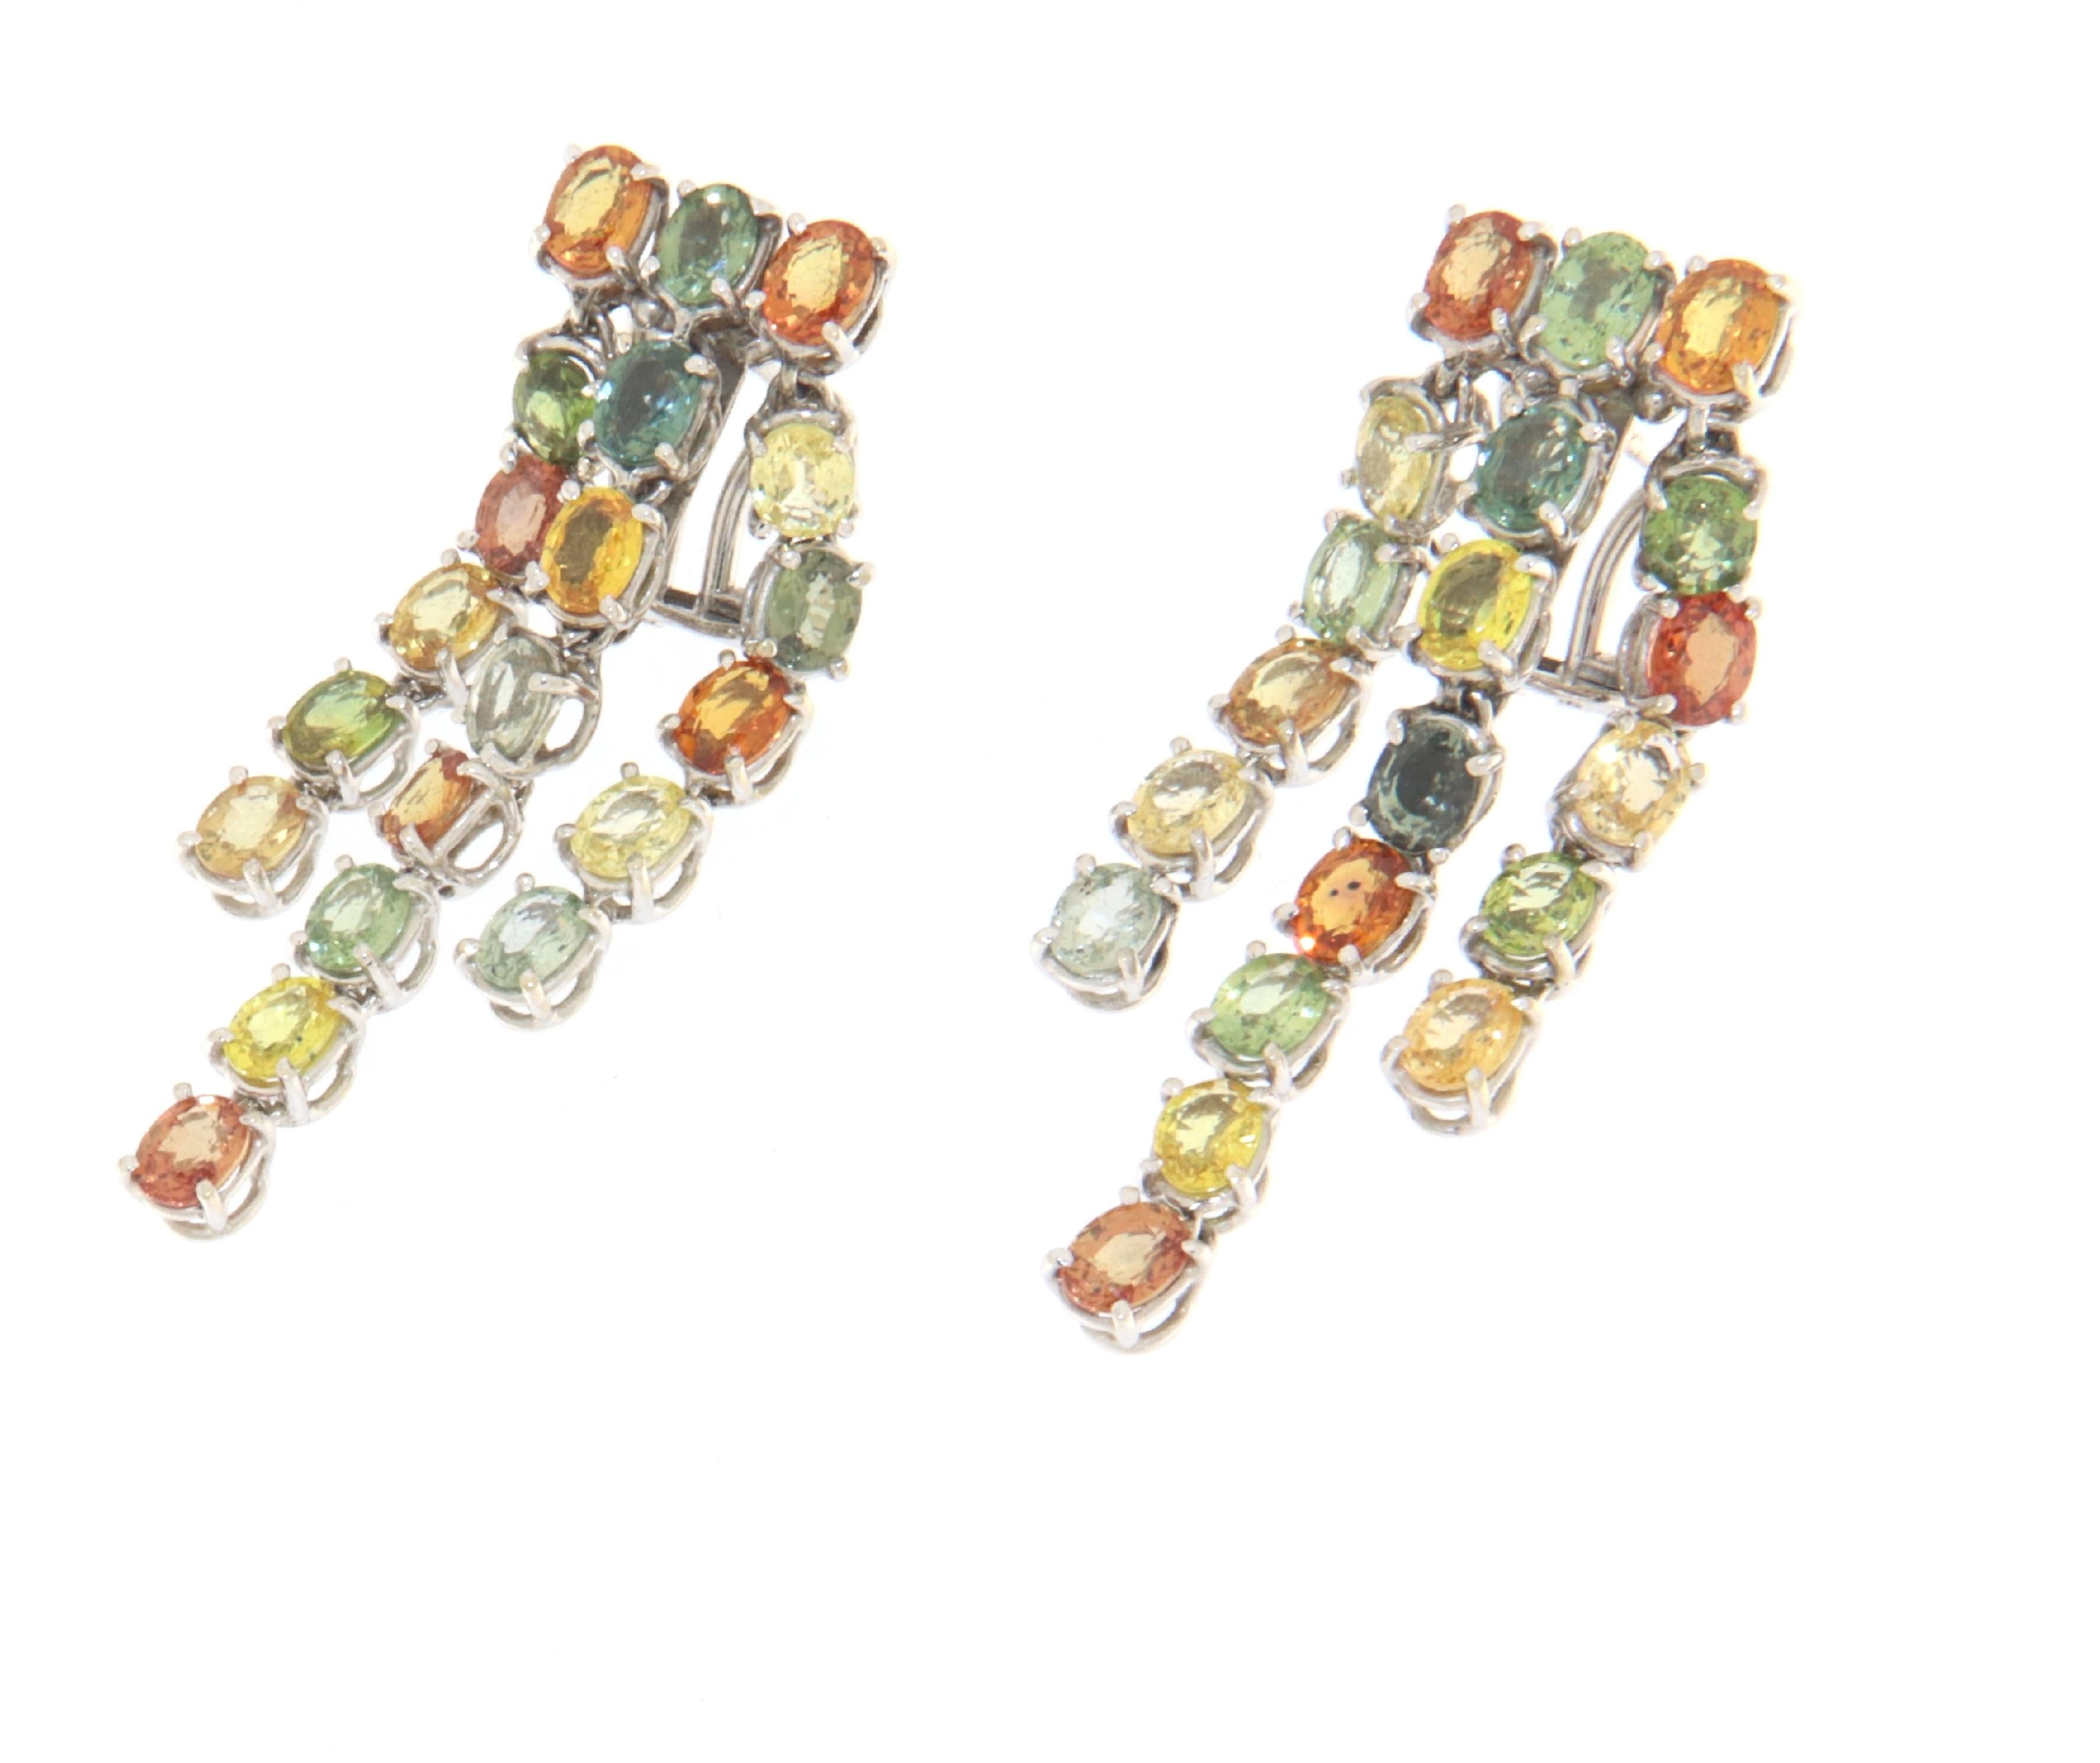 These dazzling 18-karat white gold earrings are a celebration of color and light, featuring a cascade of multi-colored sapphires that sparkle with every turn. The arrangement of the sapphires in a playful, yet elegant waterfall design showcases an